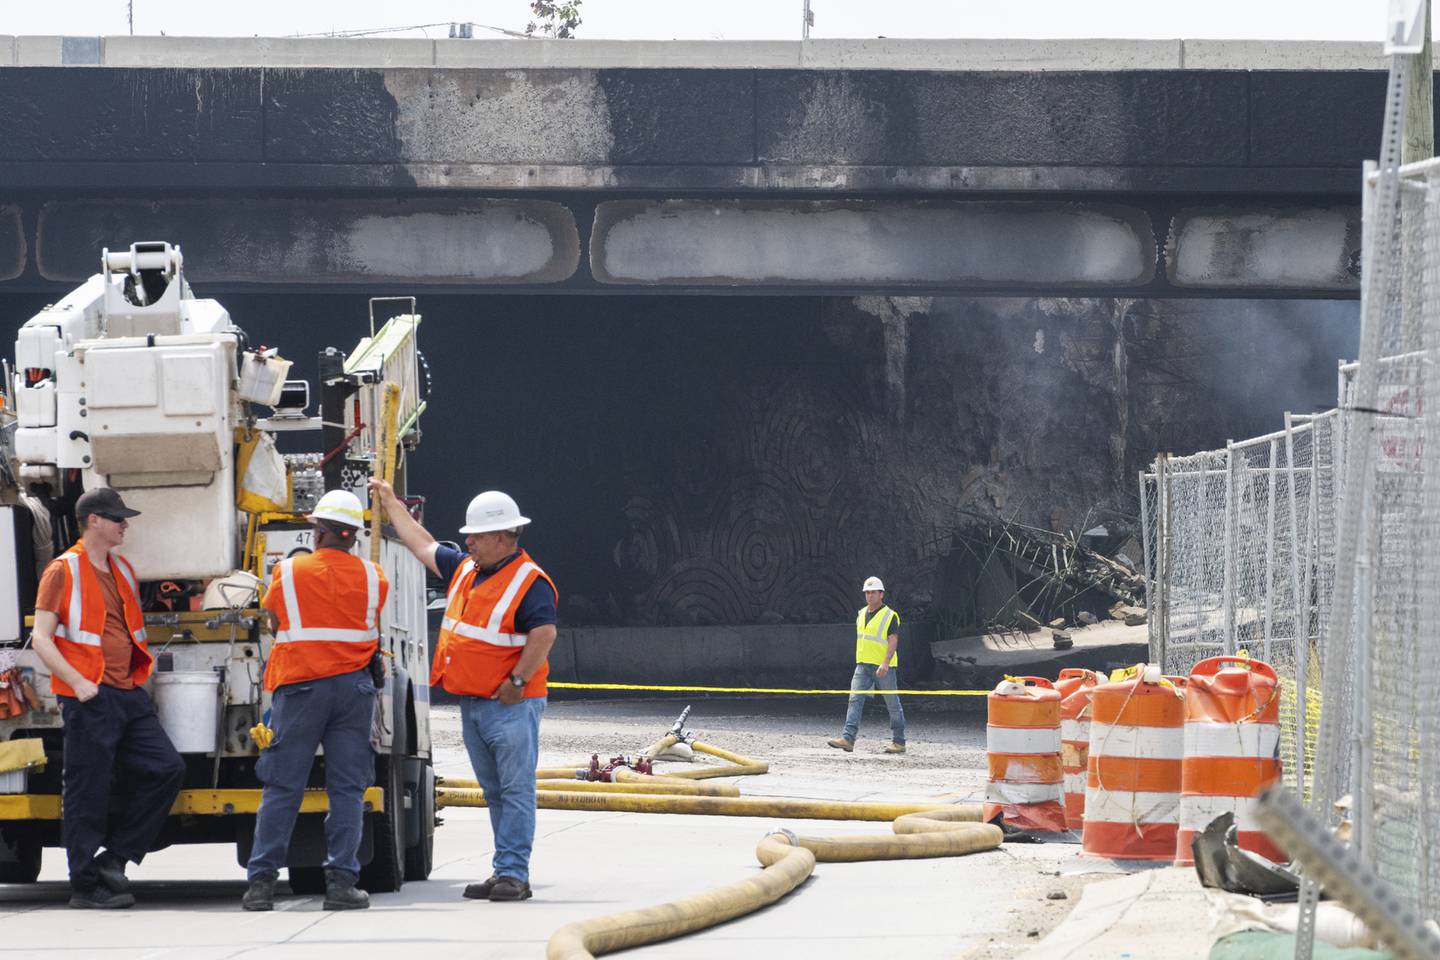 Officials work on the scene following a collapse on I-95 after a truck fire, Sunday, June 11, 2023 in Philadelphia.